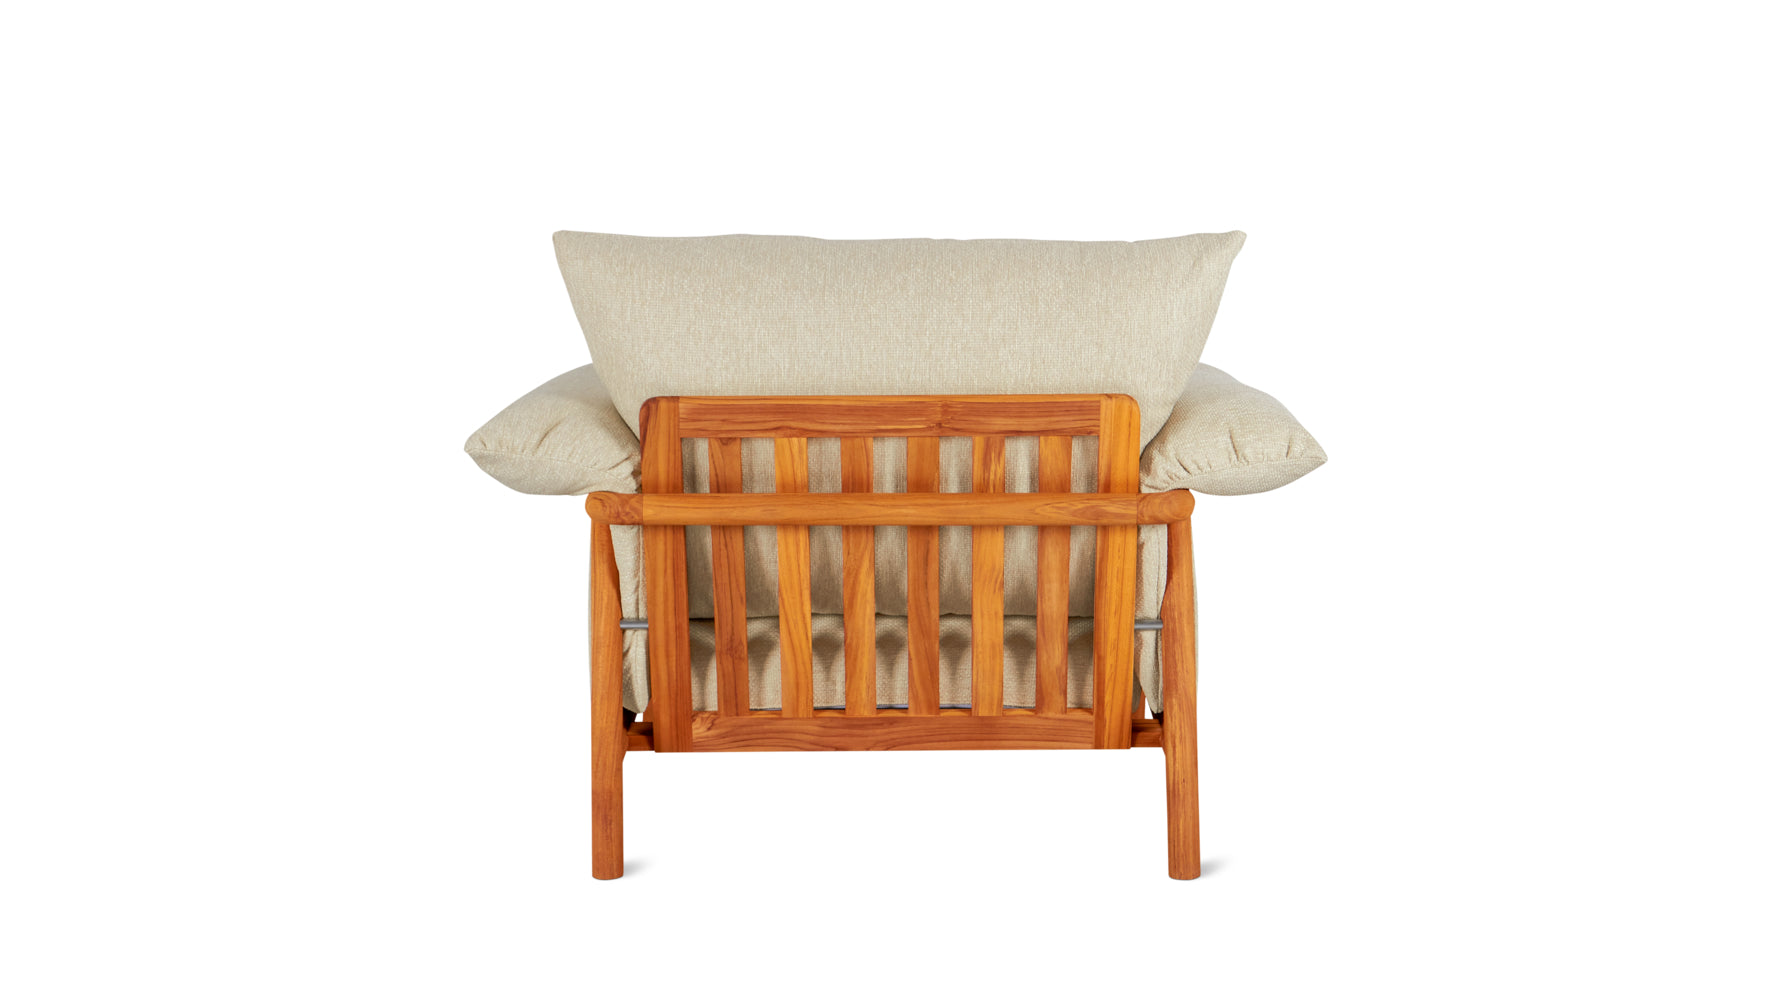 Pillow Talk Outdoor Lounge Chair, Sandy - Image 7